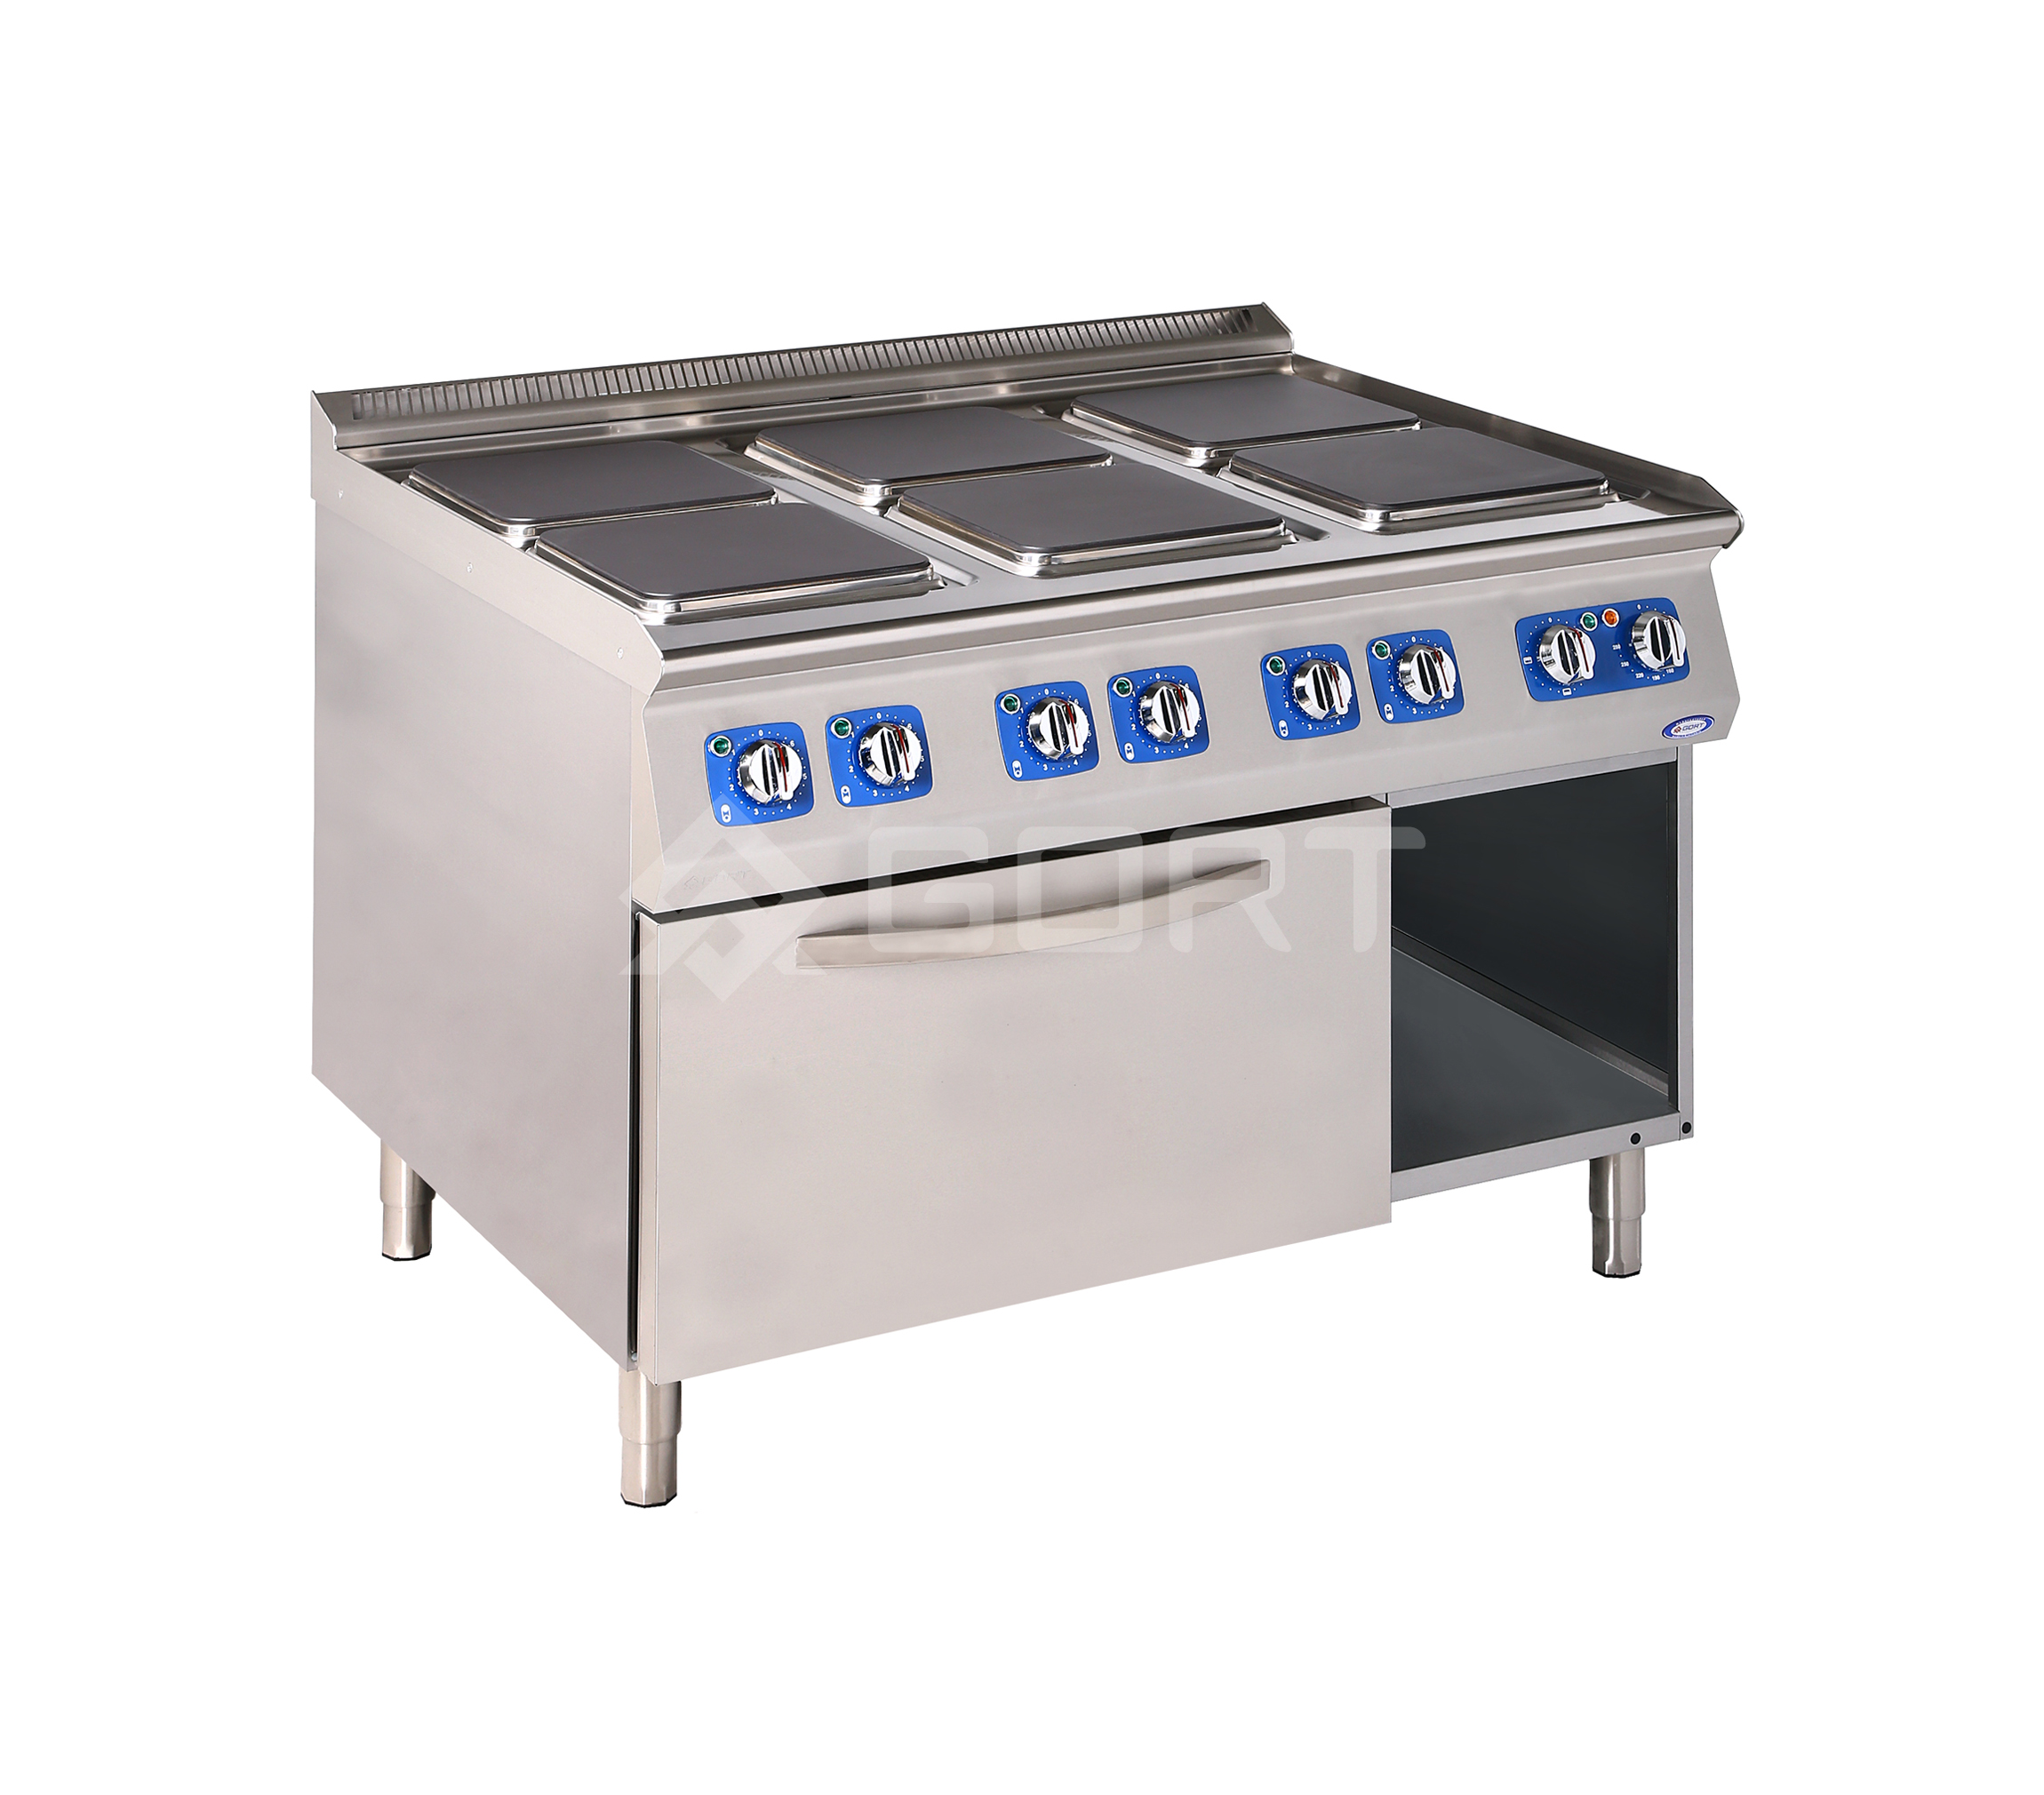 6 plate electric cooking range on electric oven L900